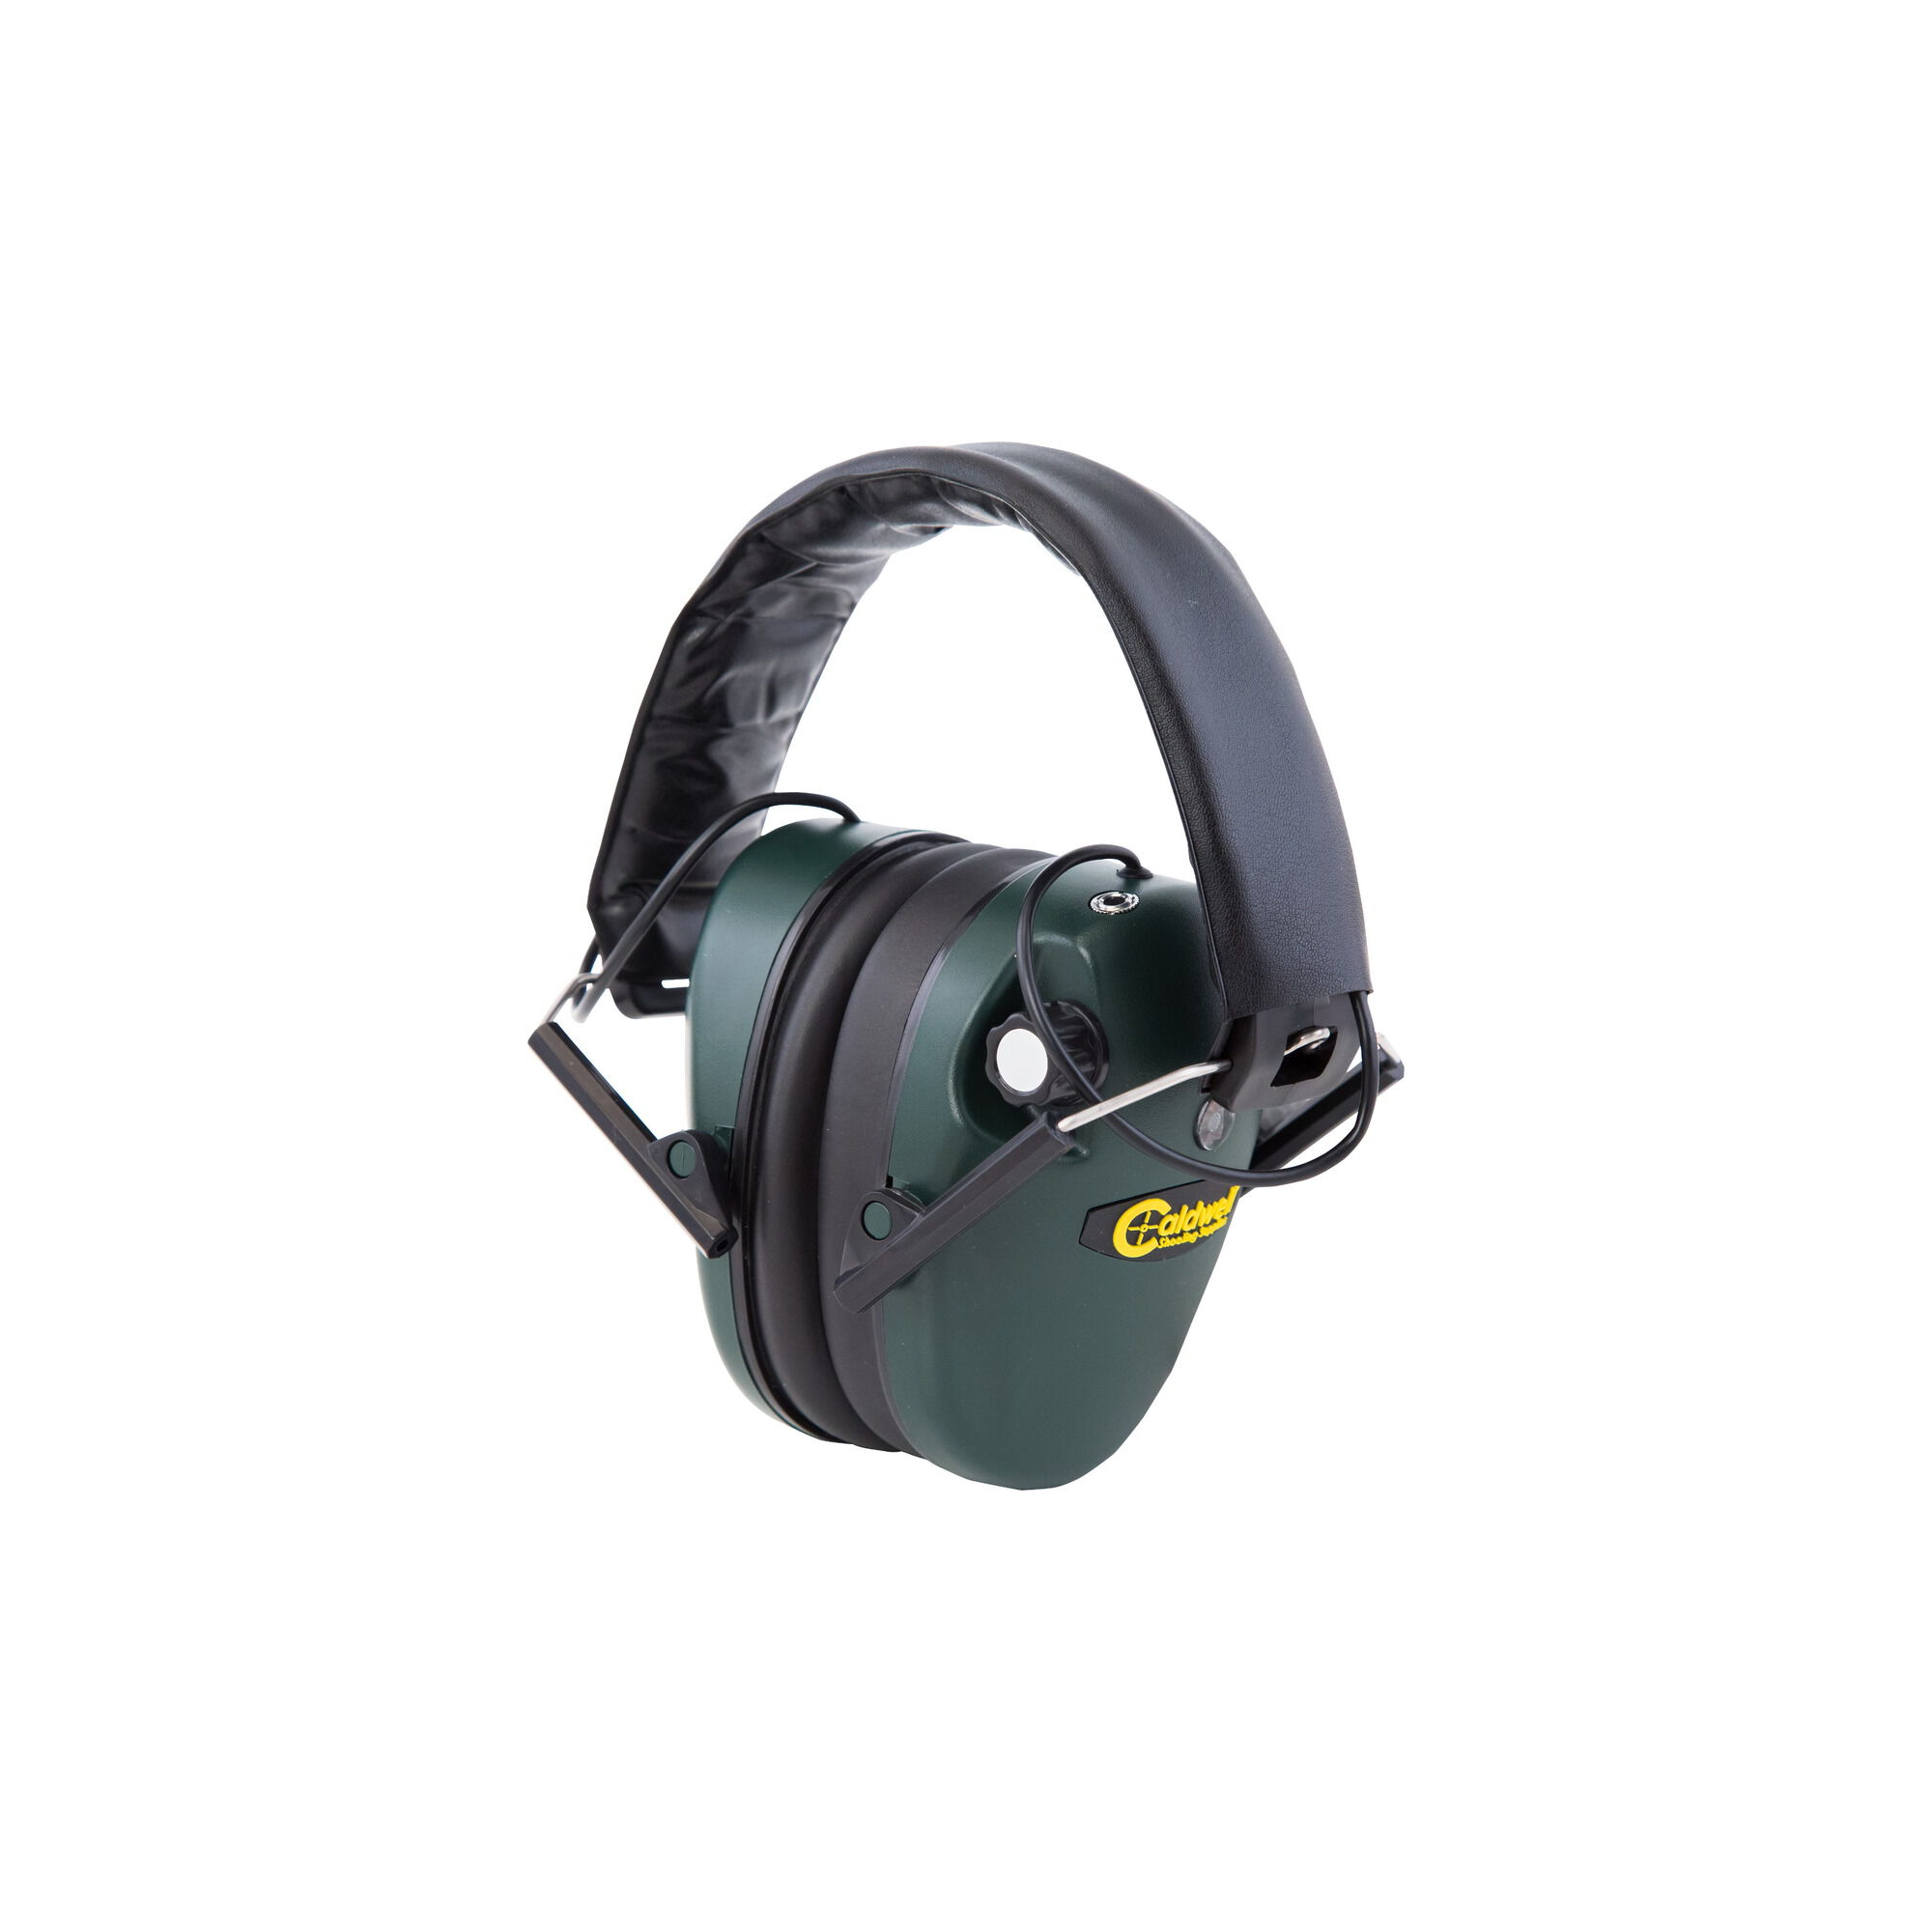 Caldwell E-Max Electronic Hearing Protection Low-Profile Ear Muffs 487557 